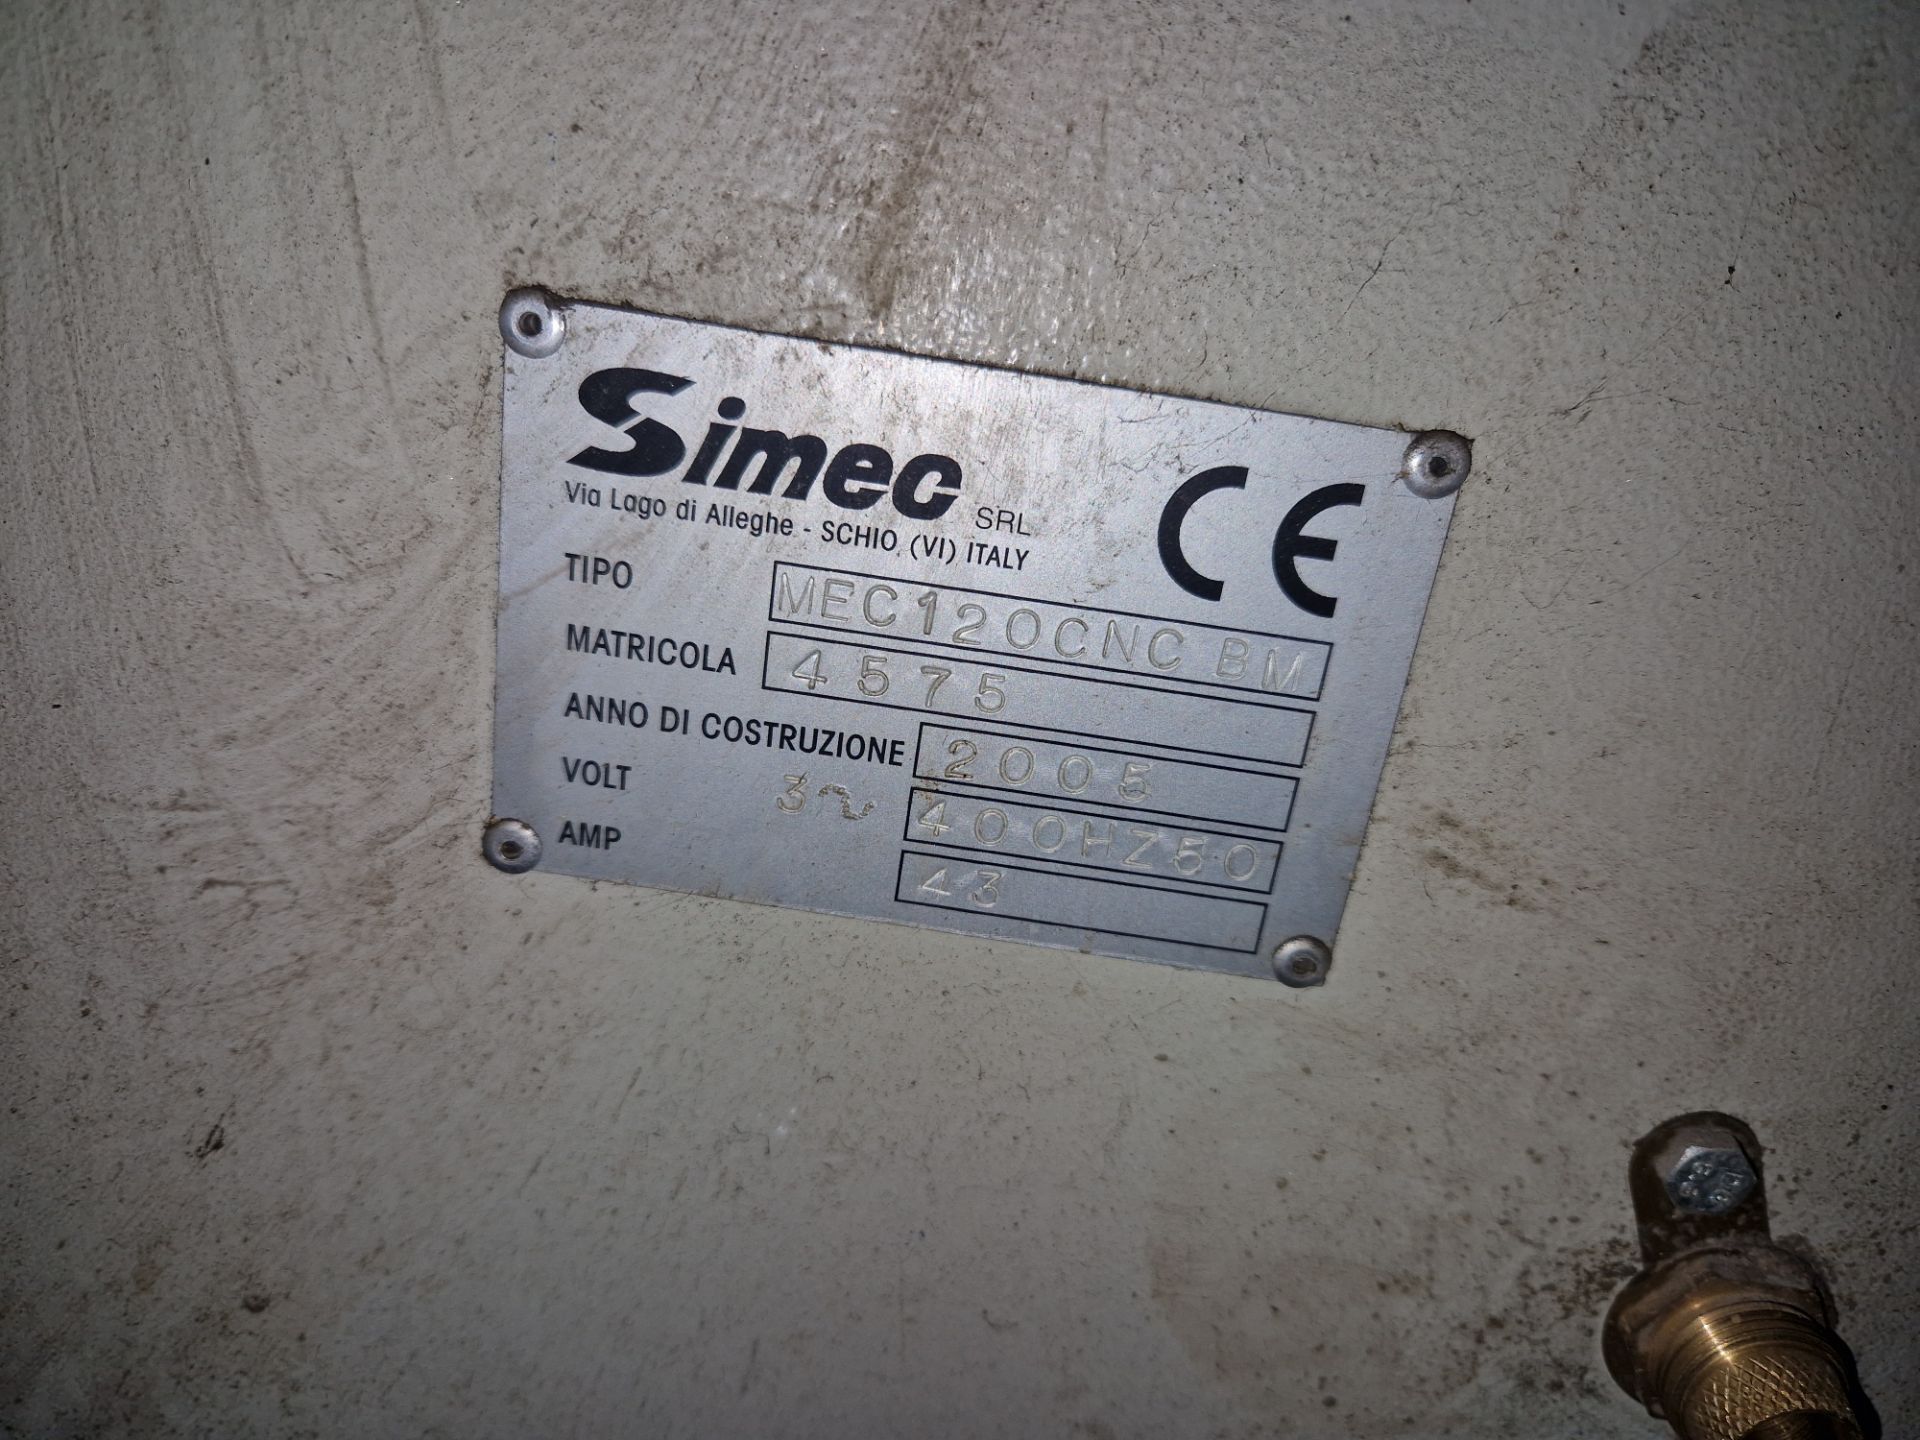 Simec MEC120CNC BM CNC Saw, serial no. 4575, year of manufacture 2005 (Working State Unknown). - Image 9 of 9